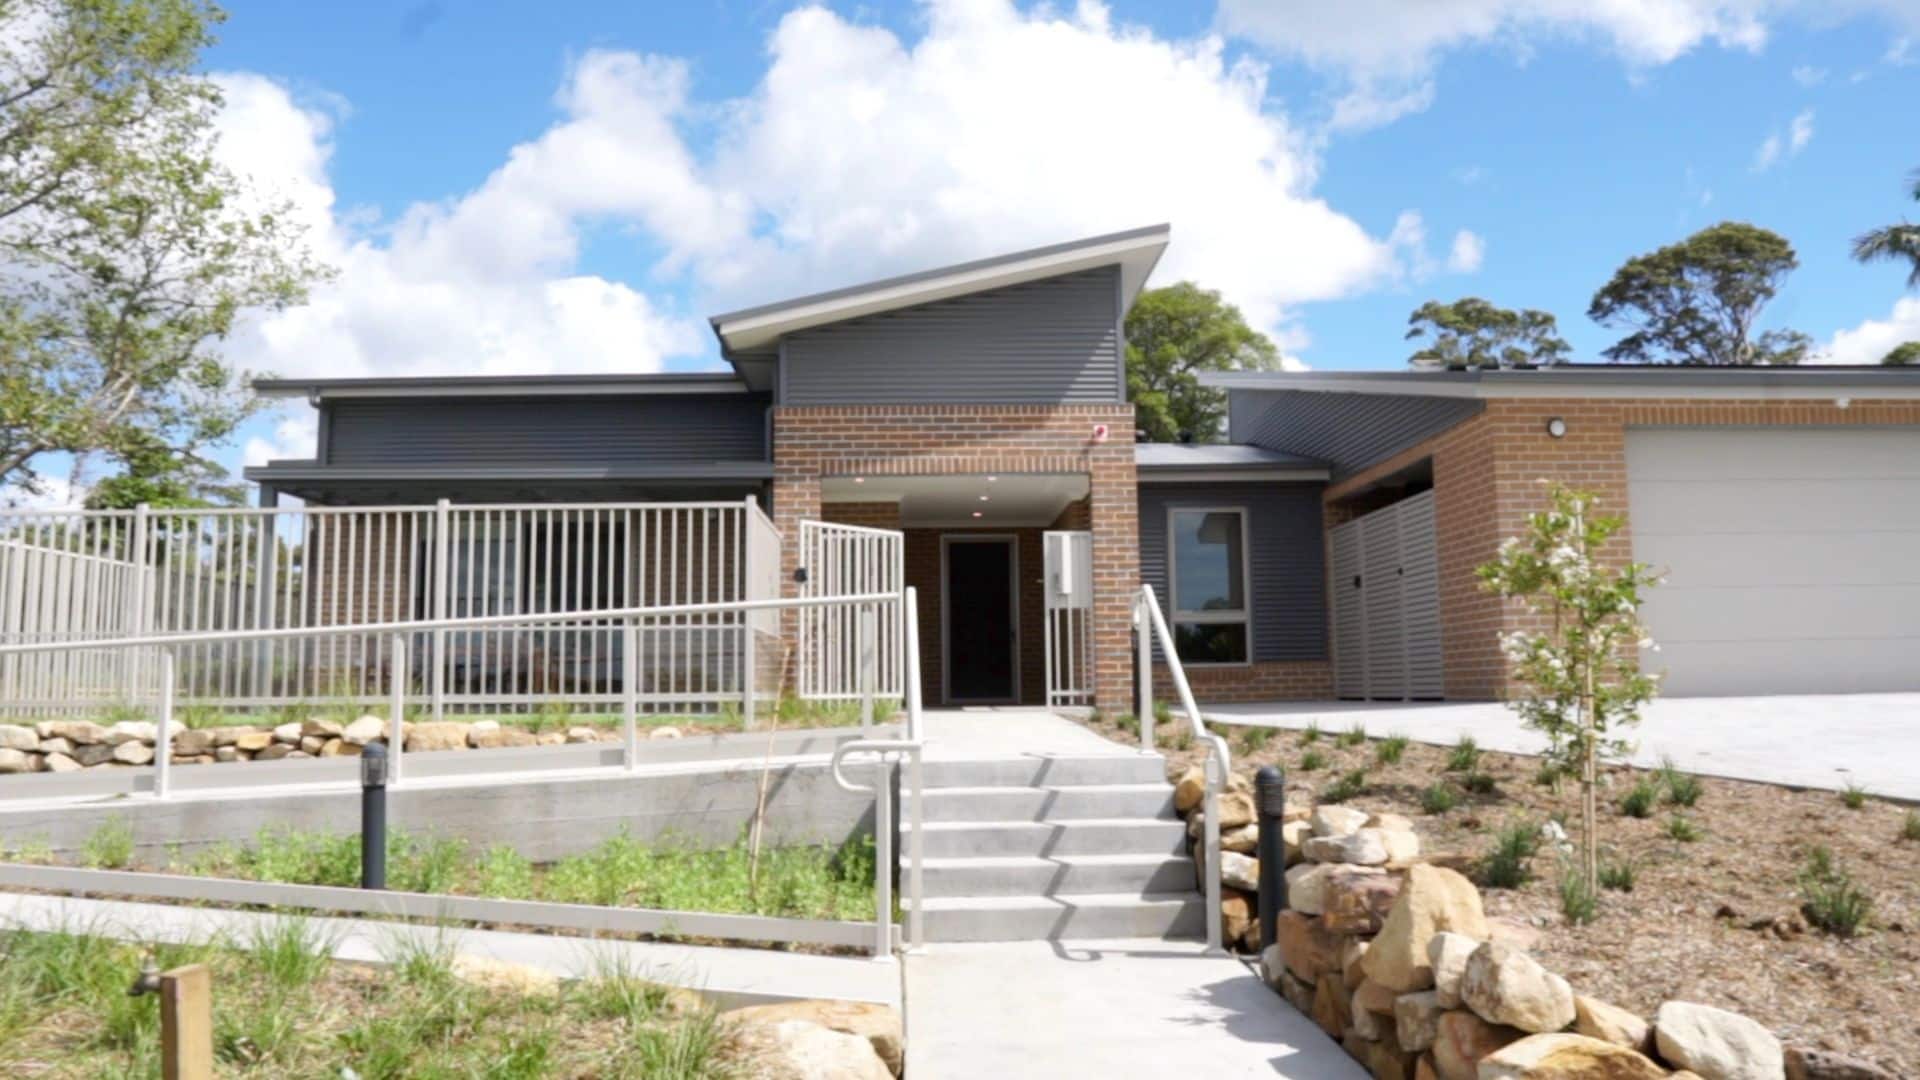 Front of the Wyong 1 property, a set of stairs with a ramp beside it leading up to a brick house.